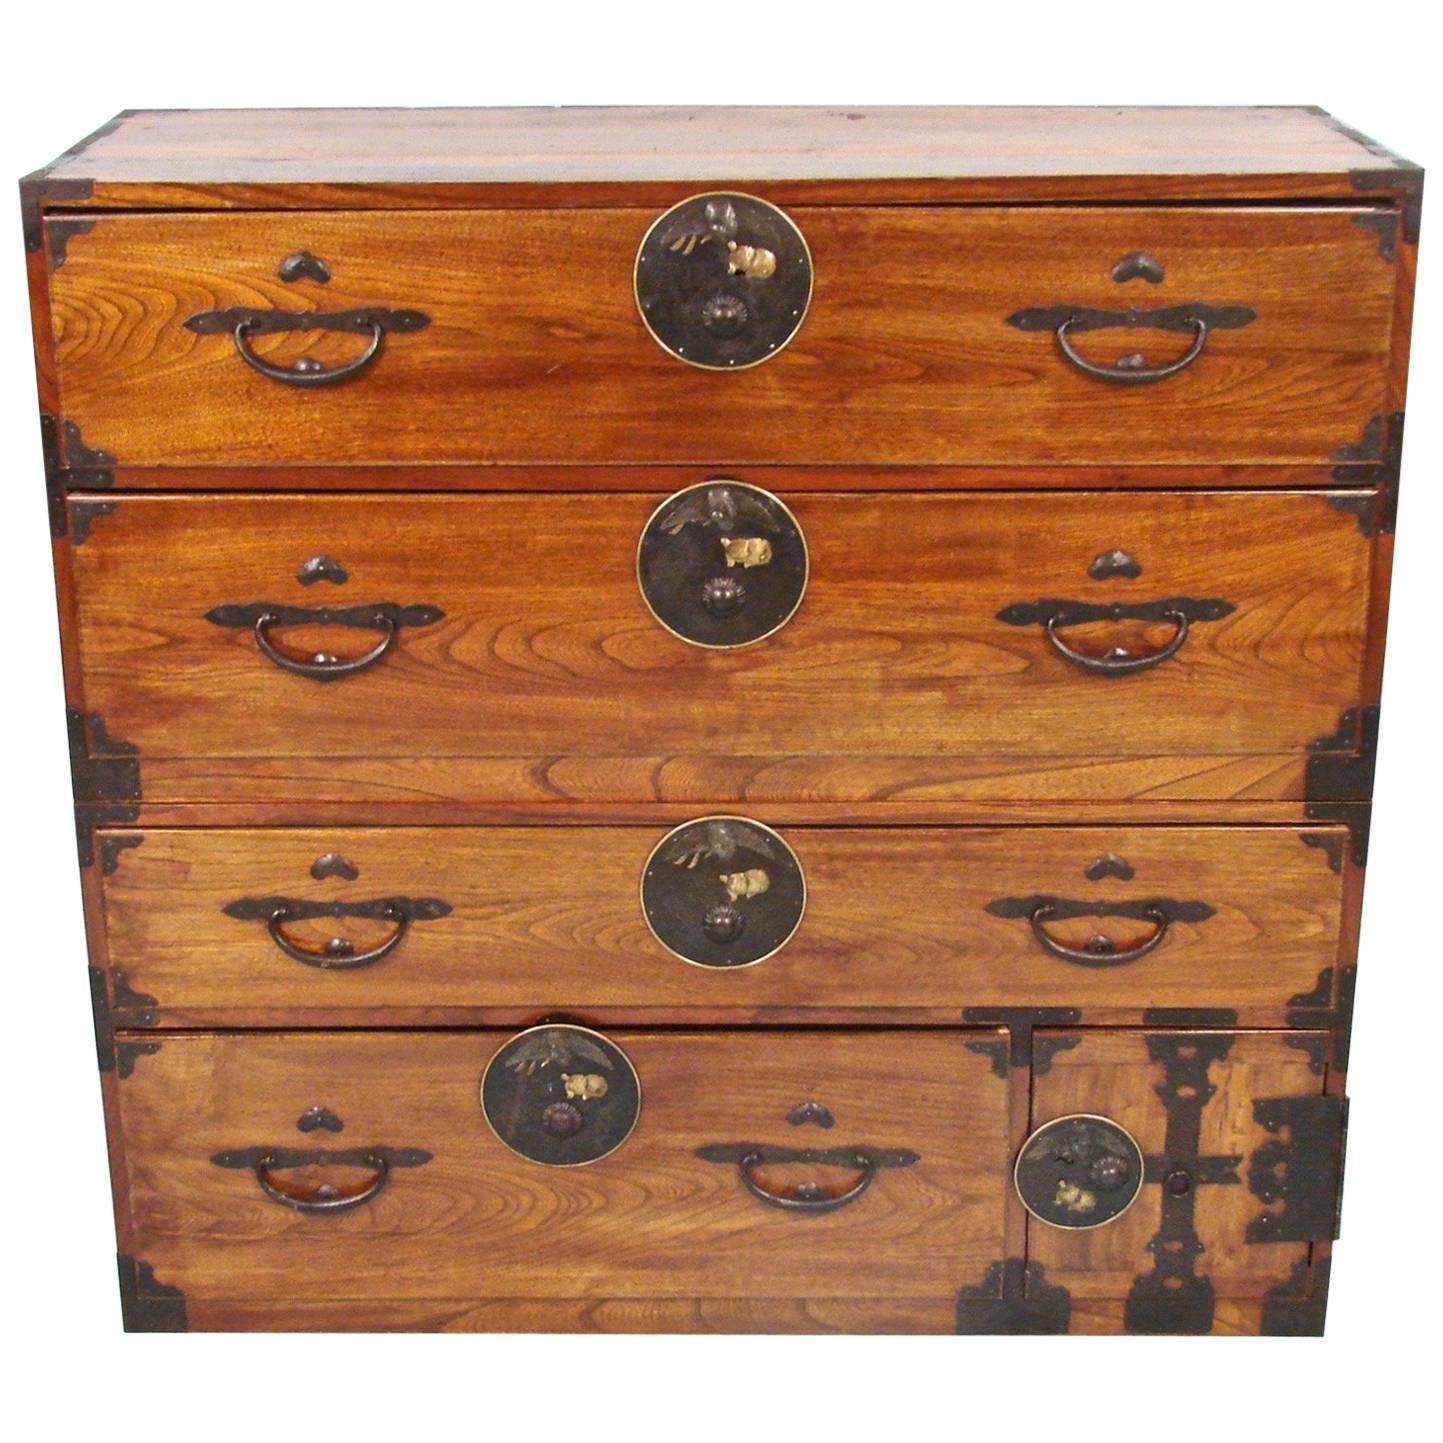 Japanese Elm and Pine Clothing Tansu with Crane and Turtle Hardware